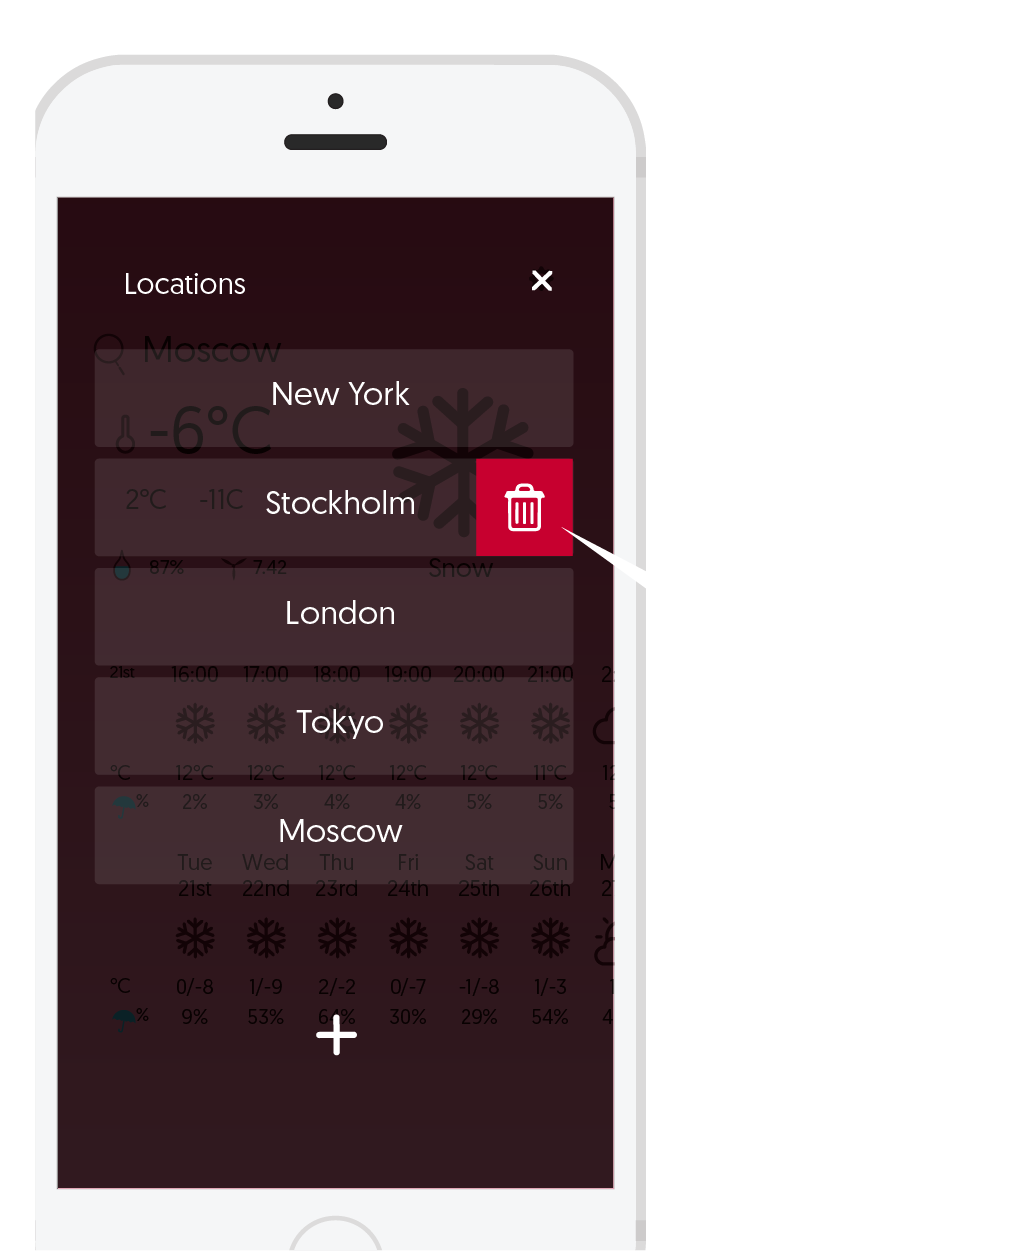 Search, save, and delete any location - swipe to remove